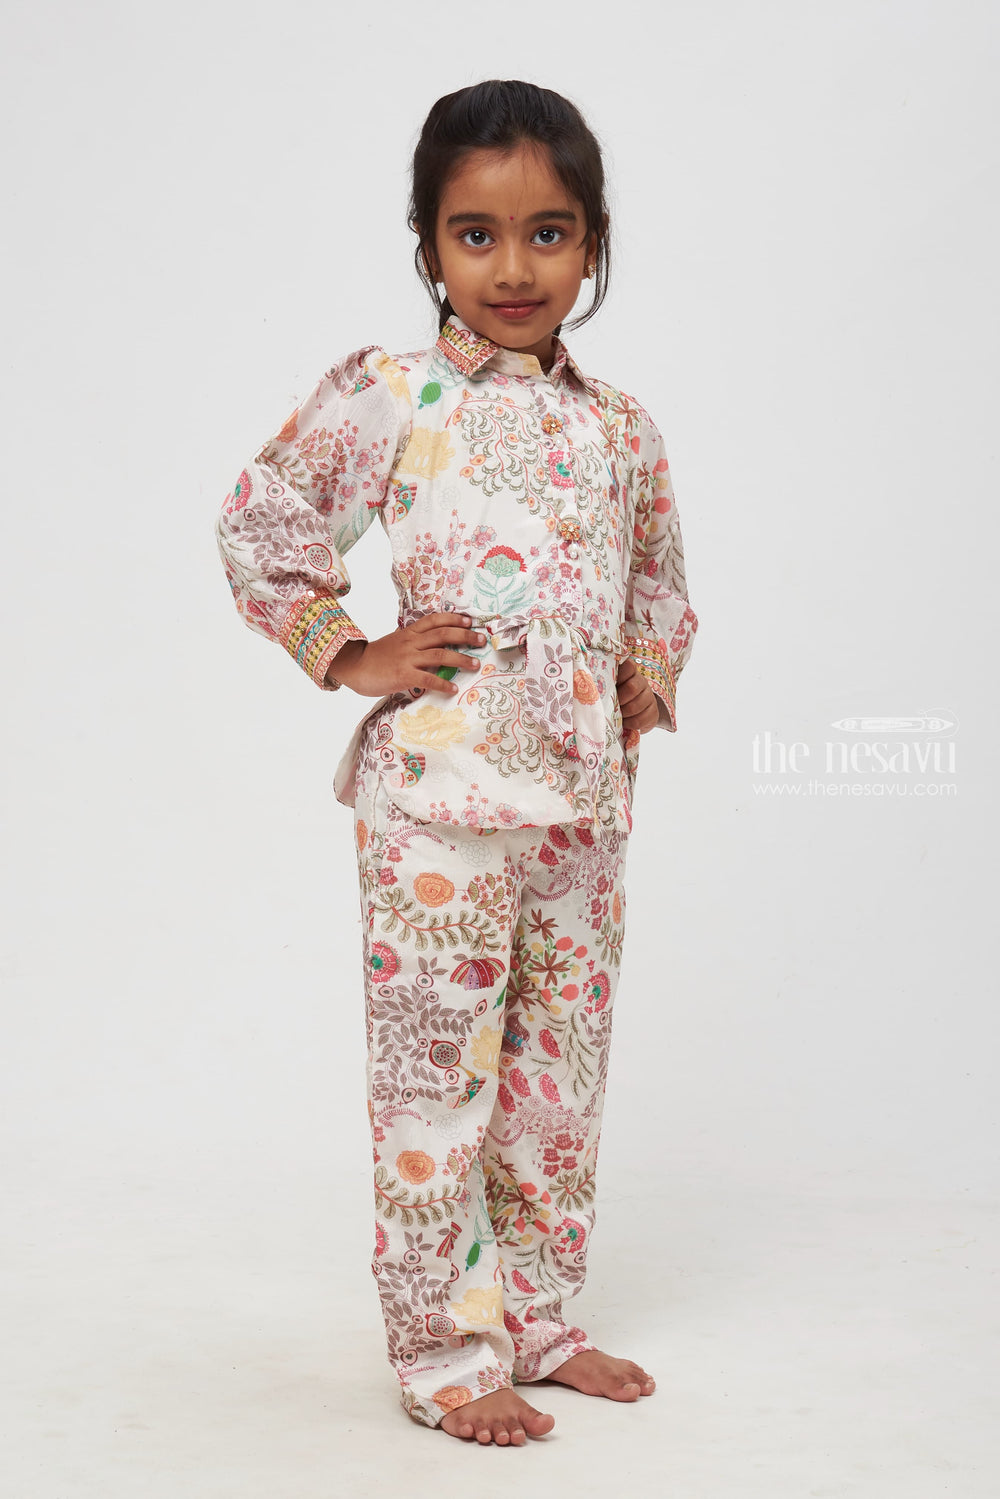 The Nesavu Girls Sharara / Plazo Set Whimsical Nature-Inspired Printed Co-Ord Sets for Kids Nesavu Vibrant Nature-Inspired Printed Outfit | Whimsical Kids Casual Wear | Unique Bird and Floral Design